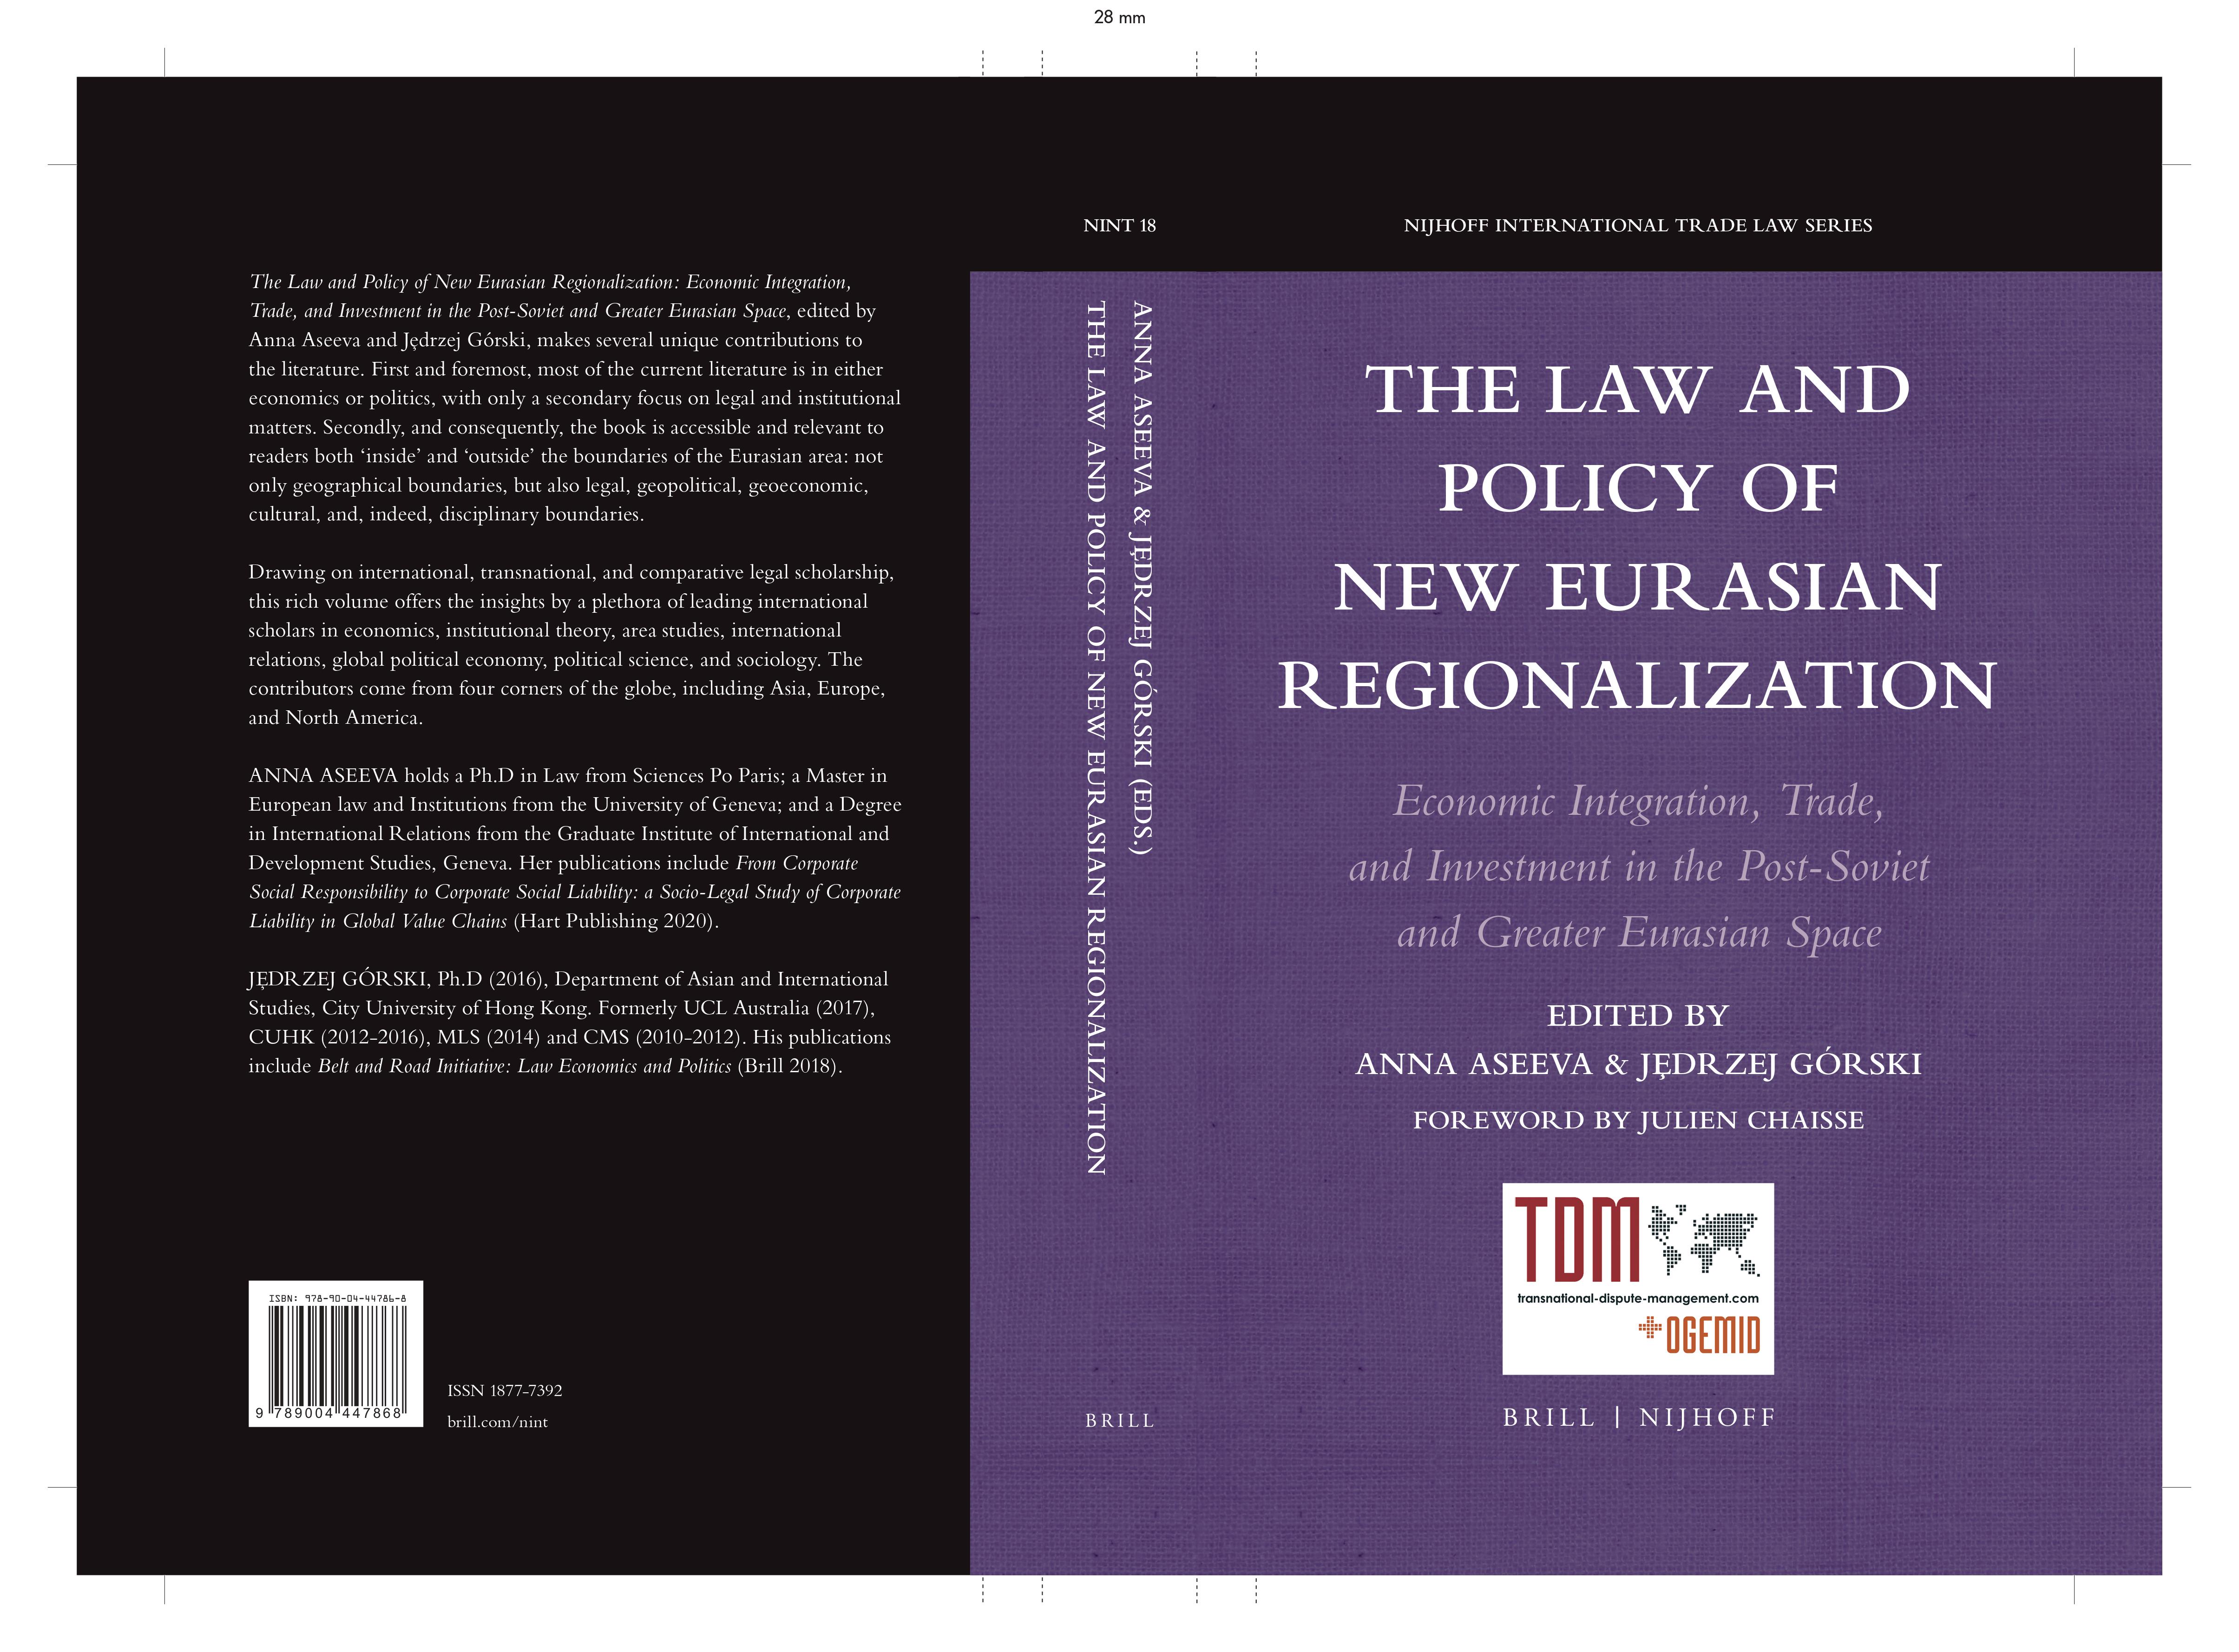 The Law and Policy of New Eurasian Regionalization. Economic Integration, Trade, and Investment in the Post-Soviet and Greater Eurasian Space